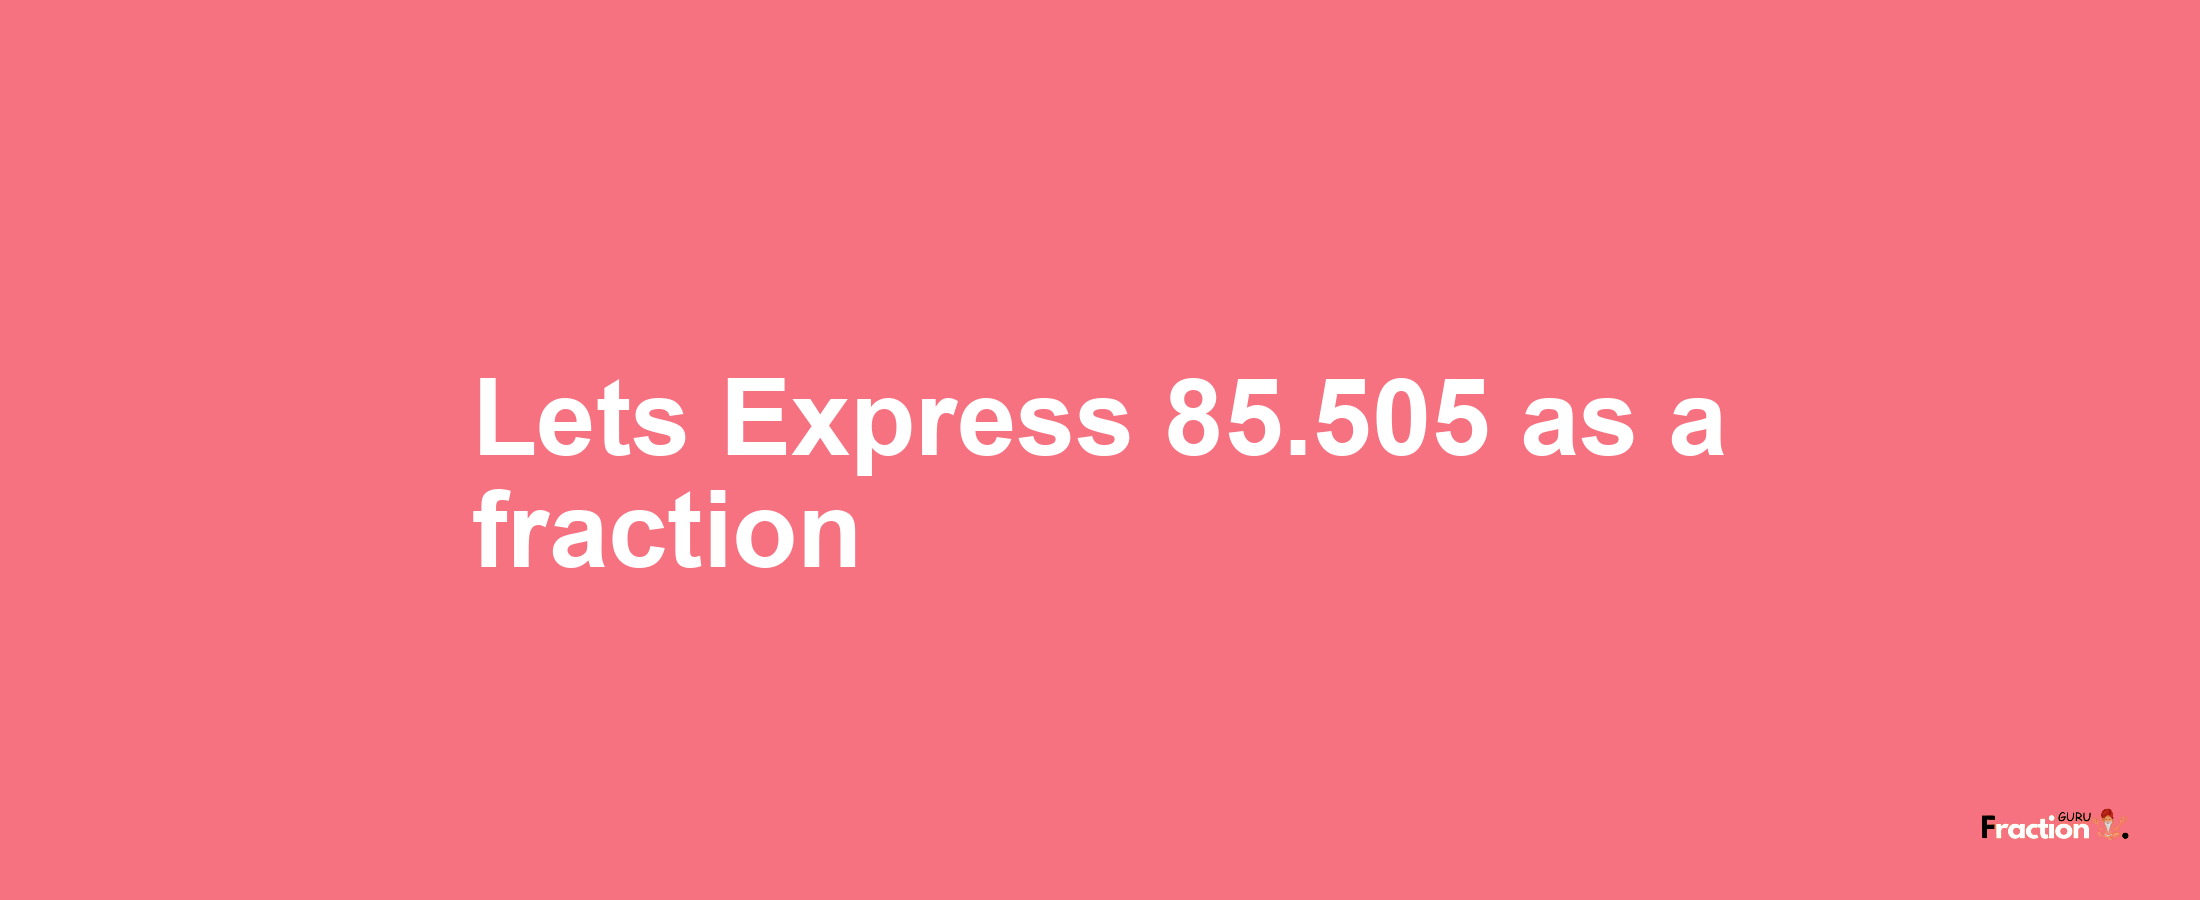 Lets Express 85.505 as afraction